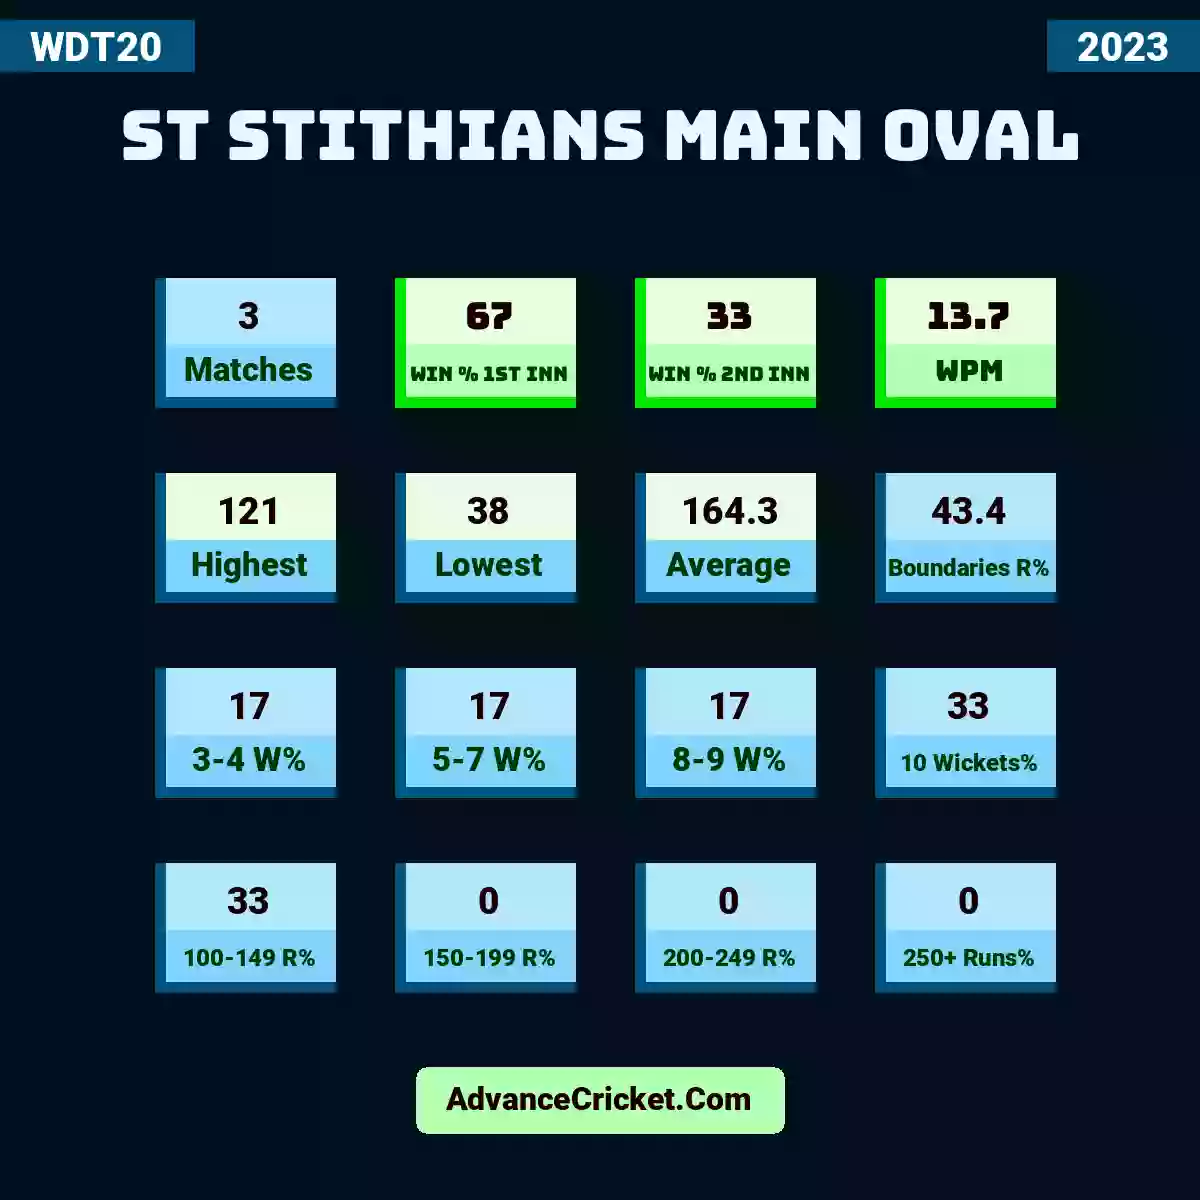 Image showing St Stithians Main Oval with Matches: 3, Win % 1st Inn: 67, Win % 2nd Inn: 33, WPM: 13.7, Highest: 121, Lowest: 38, Average: 164.3, Boundaries R%: 43.4, 3-4 W%: 17, 5-7 W%: 17, 8-9 W%: 17, 10 Wickets%: 33, 100-149 R%: 33, 150-199 R%: 0, 200-249 R%: 0, 250+ Runs%: 0.